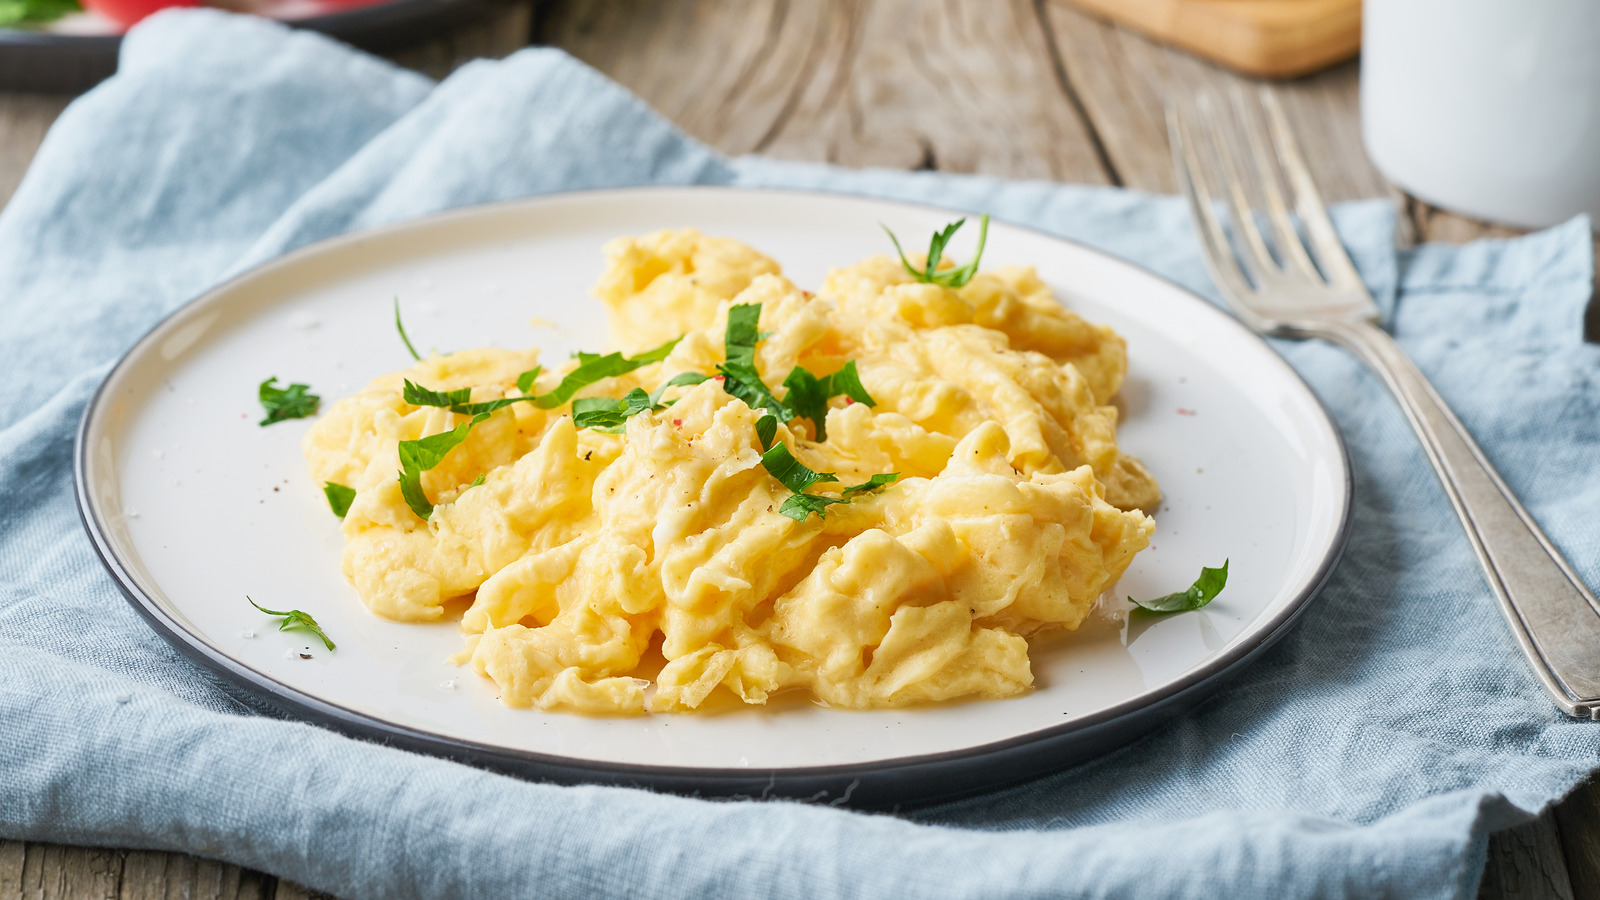 https://www.tastingtable.com/img/gallery/the-key-tip-for-cooking-softer-scrambled-eggs/l-intro-1687903144.jpg